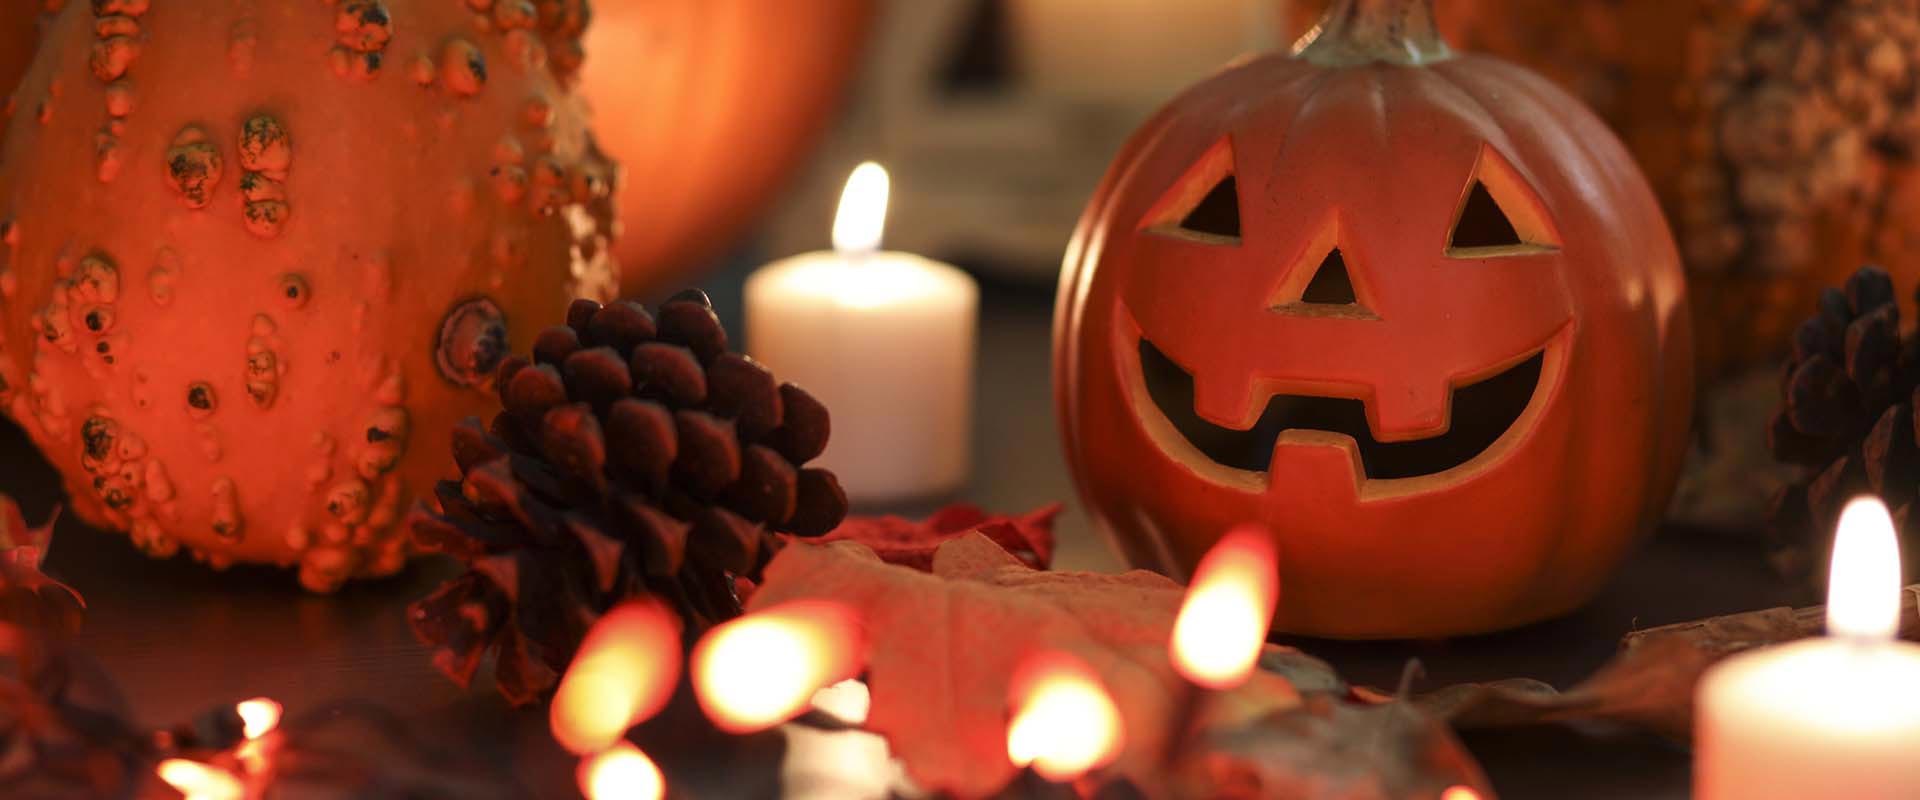 Halloween 2020, 2021 and 2022 - PublicHolidays.sg